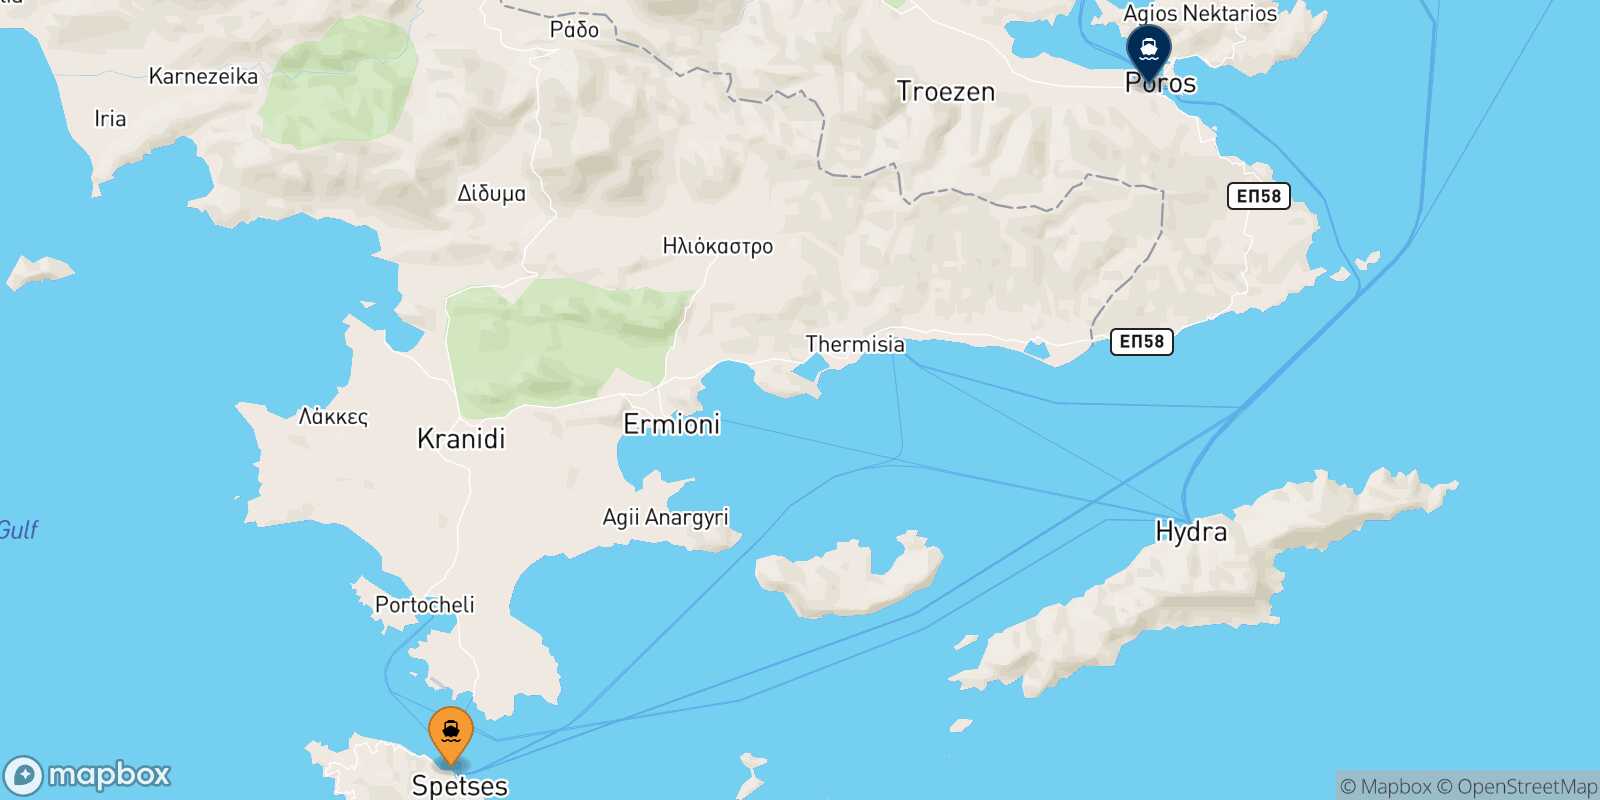 Spetses Hydra route map